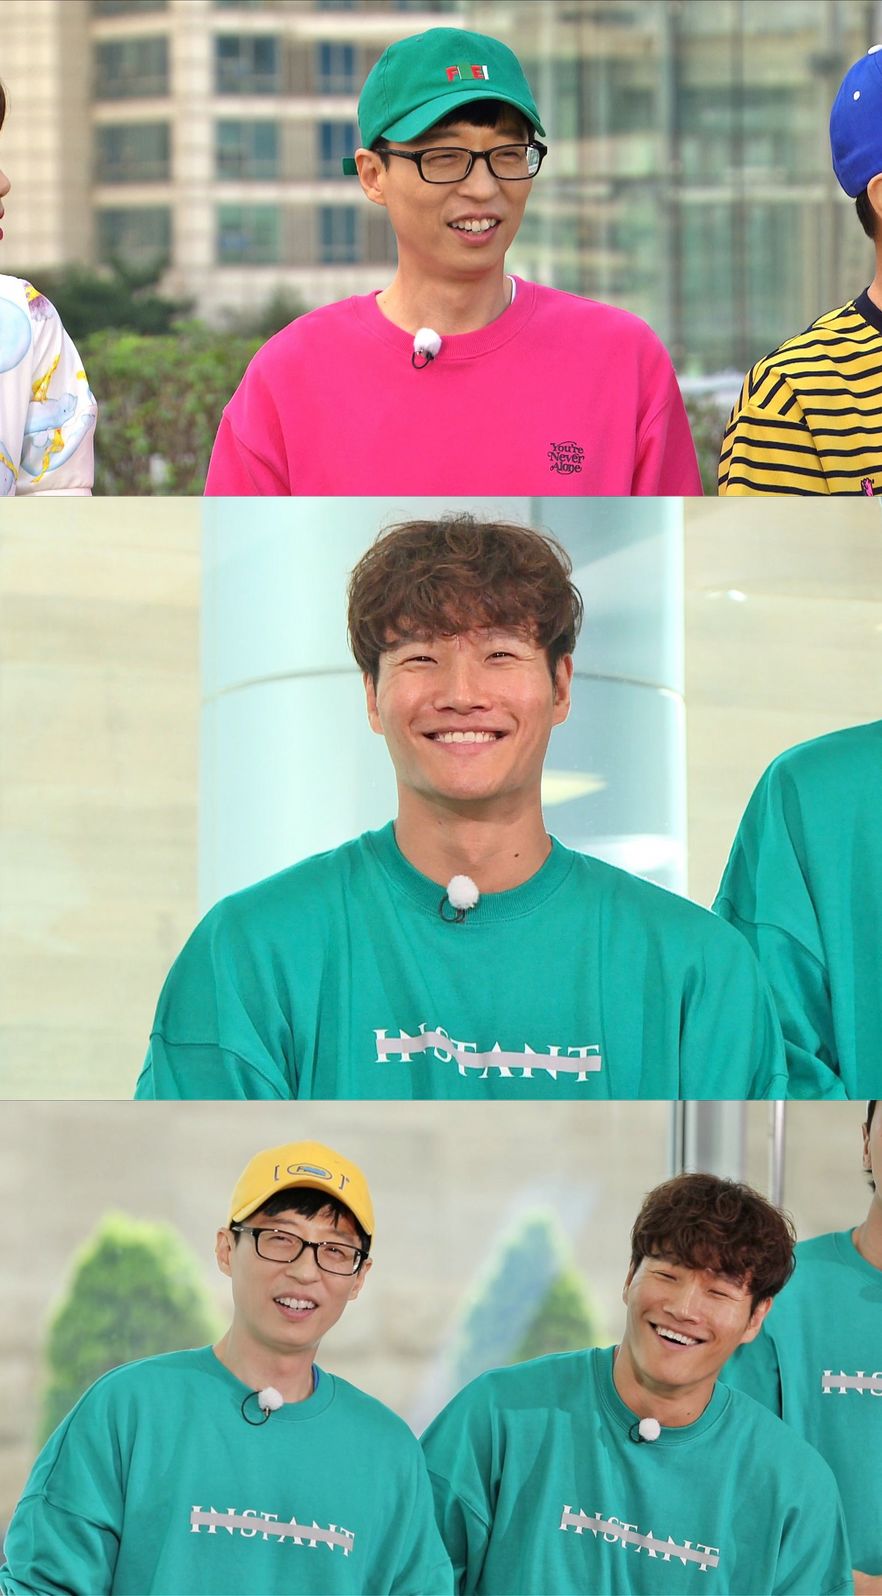 Yoo Jae-Suk plays hilarious Disclosure on Kim Jong-kookOn SBS Running Man, which is broadcasted on the 23rd, it shows Yoo Jae-Suk disclosure about Kim Jong-kook.In the recent recording, the members challenged the Chicken eggfry mission during the race.The members were embarrassed by the appearance of the extraordinary mission, but Kim Jong-kook could not hide the color of the appearance of Chicken egg, which he usually likes as a healthy food.Yoo Jae-Suk, who watched this, added, If Kim Jong-kook combines the Chicken egg that he has eaten so far, it will be two Wineville Chicken Coop Murders. The members also laughed with intense sympathy.Kim Jong-kook also nodded, unlike the backlash, and admitted to being a Chicken egg lover.